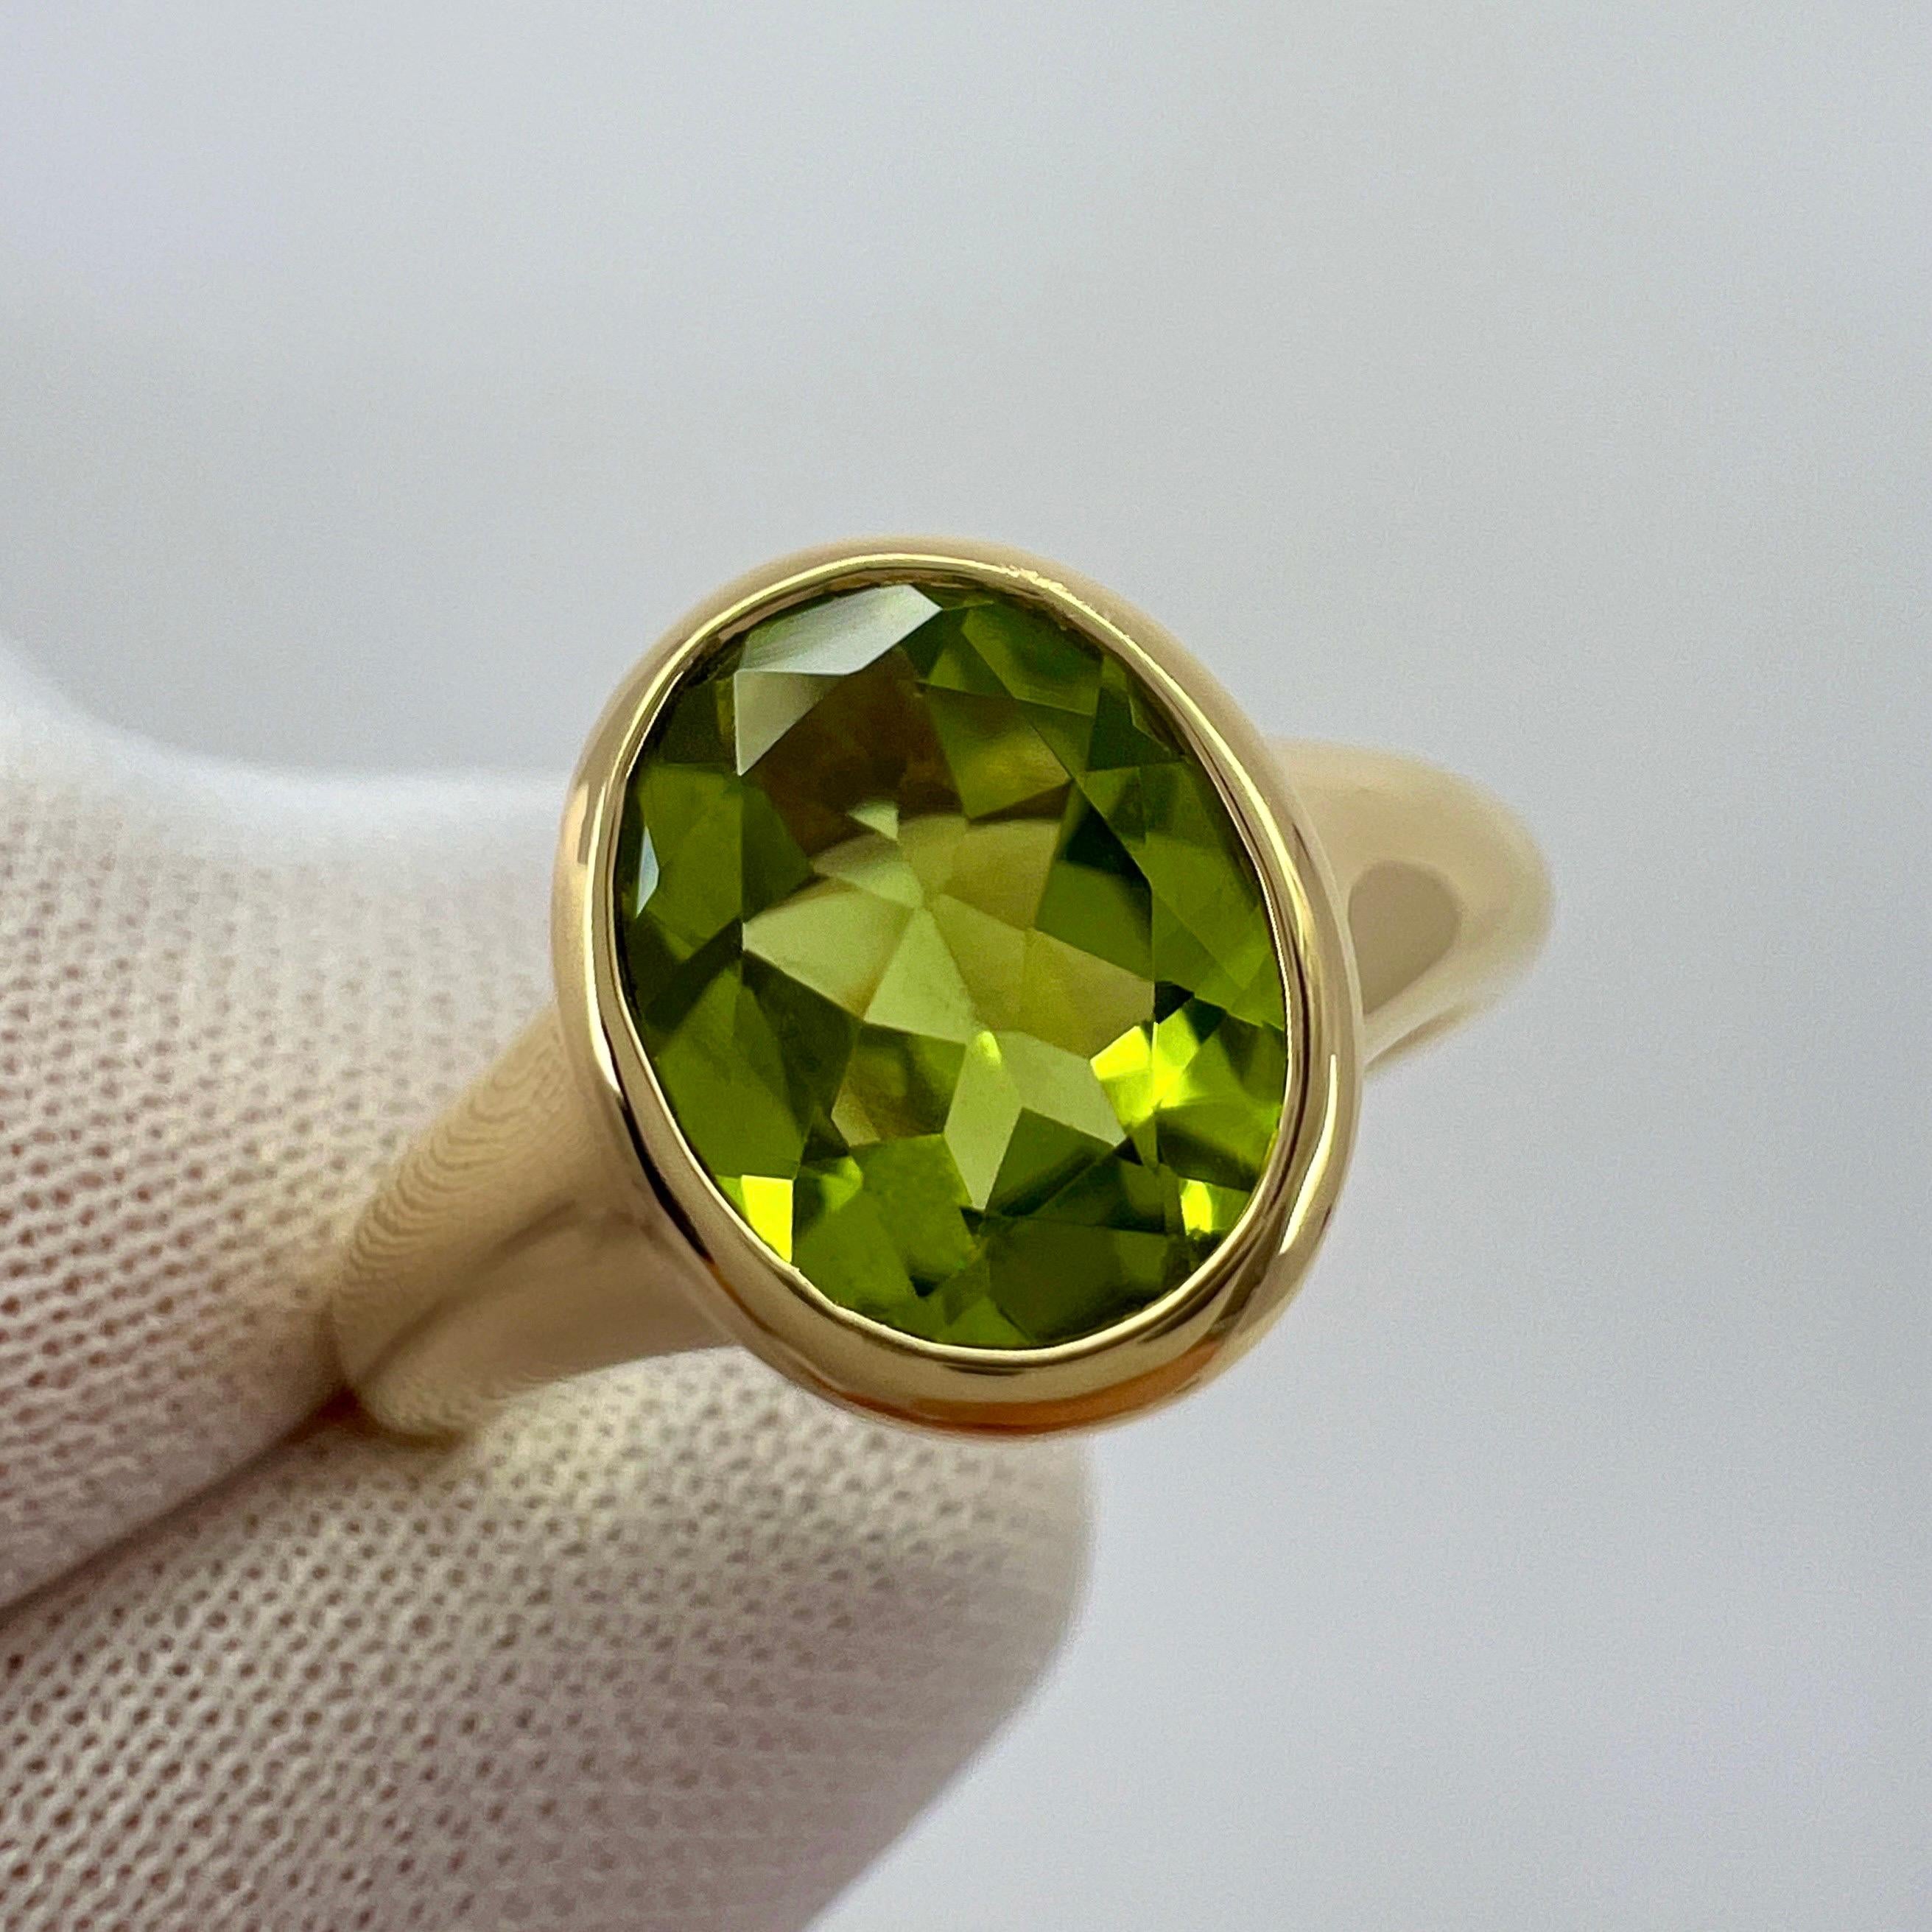 Rare Bvlgari Green Peridot Oval 18k Yellow Gold Signet Style Bezel Rubover Ring For Sale 6